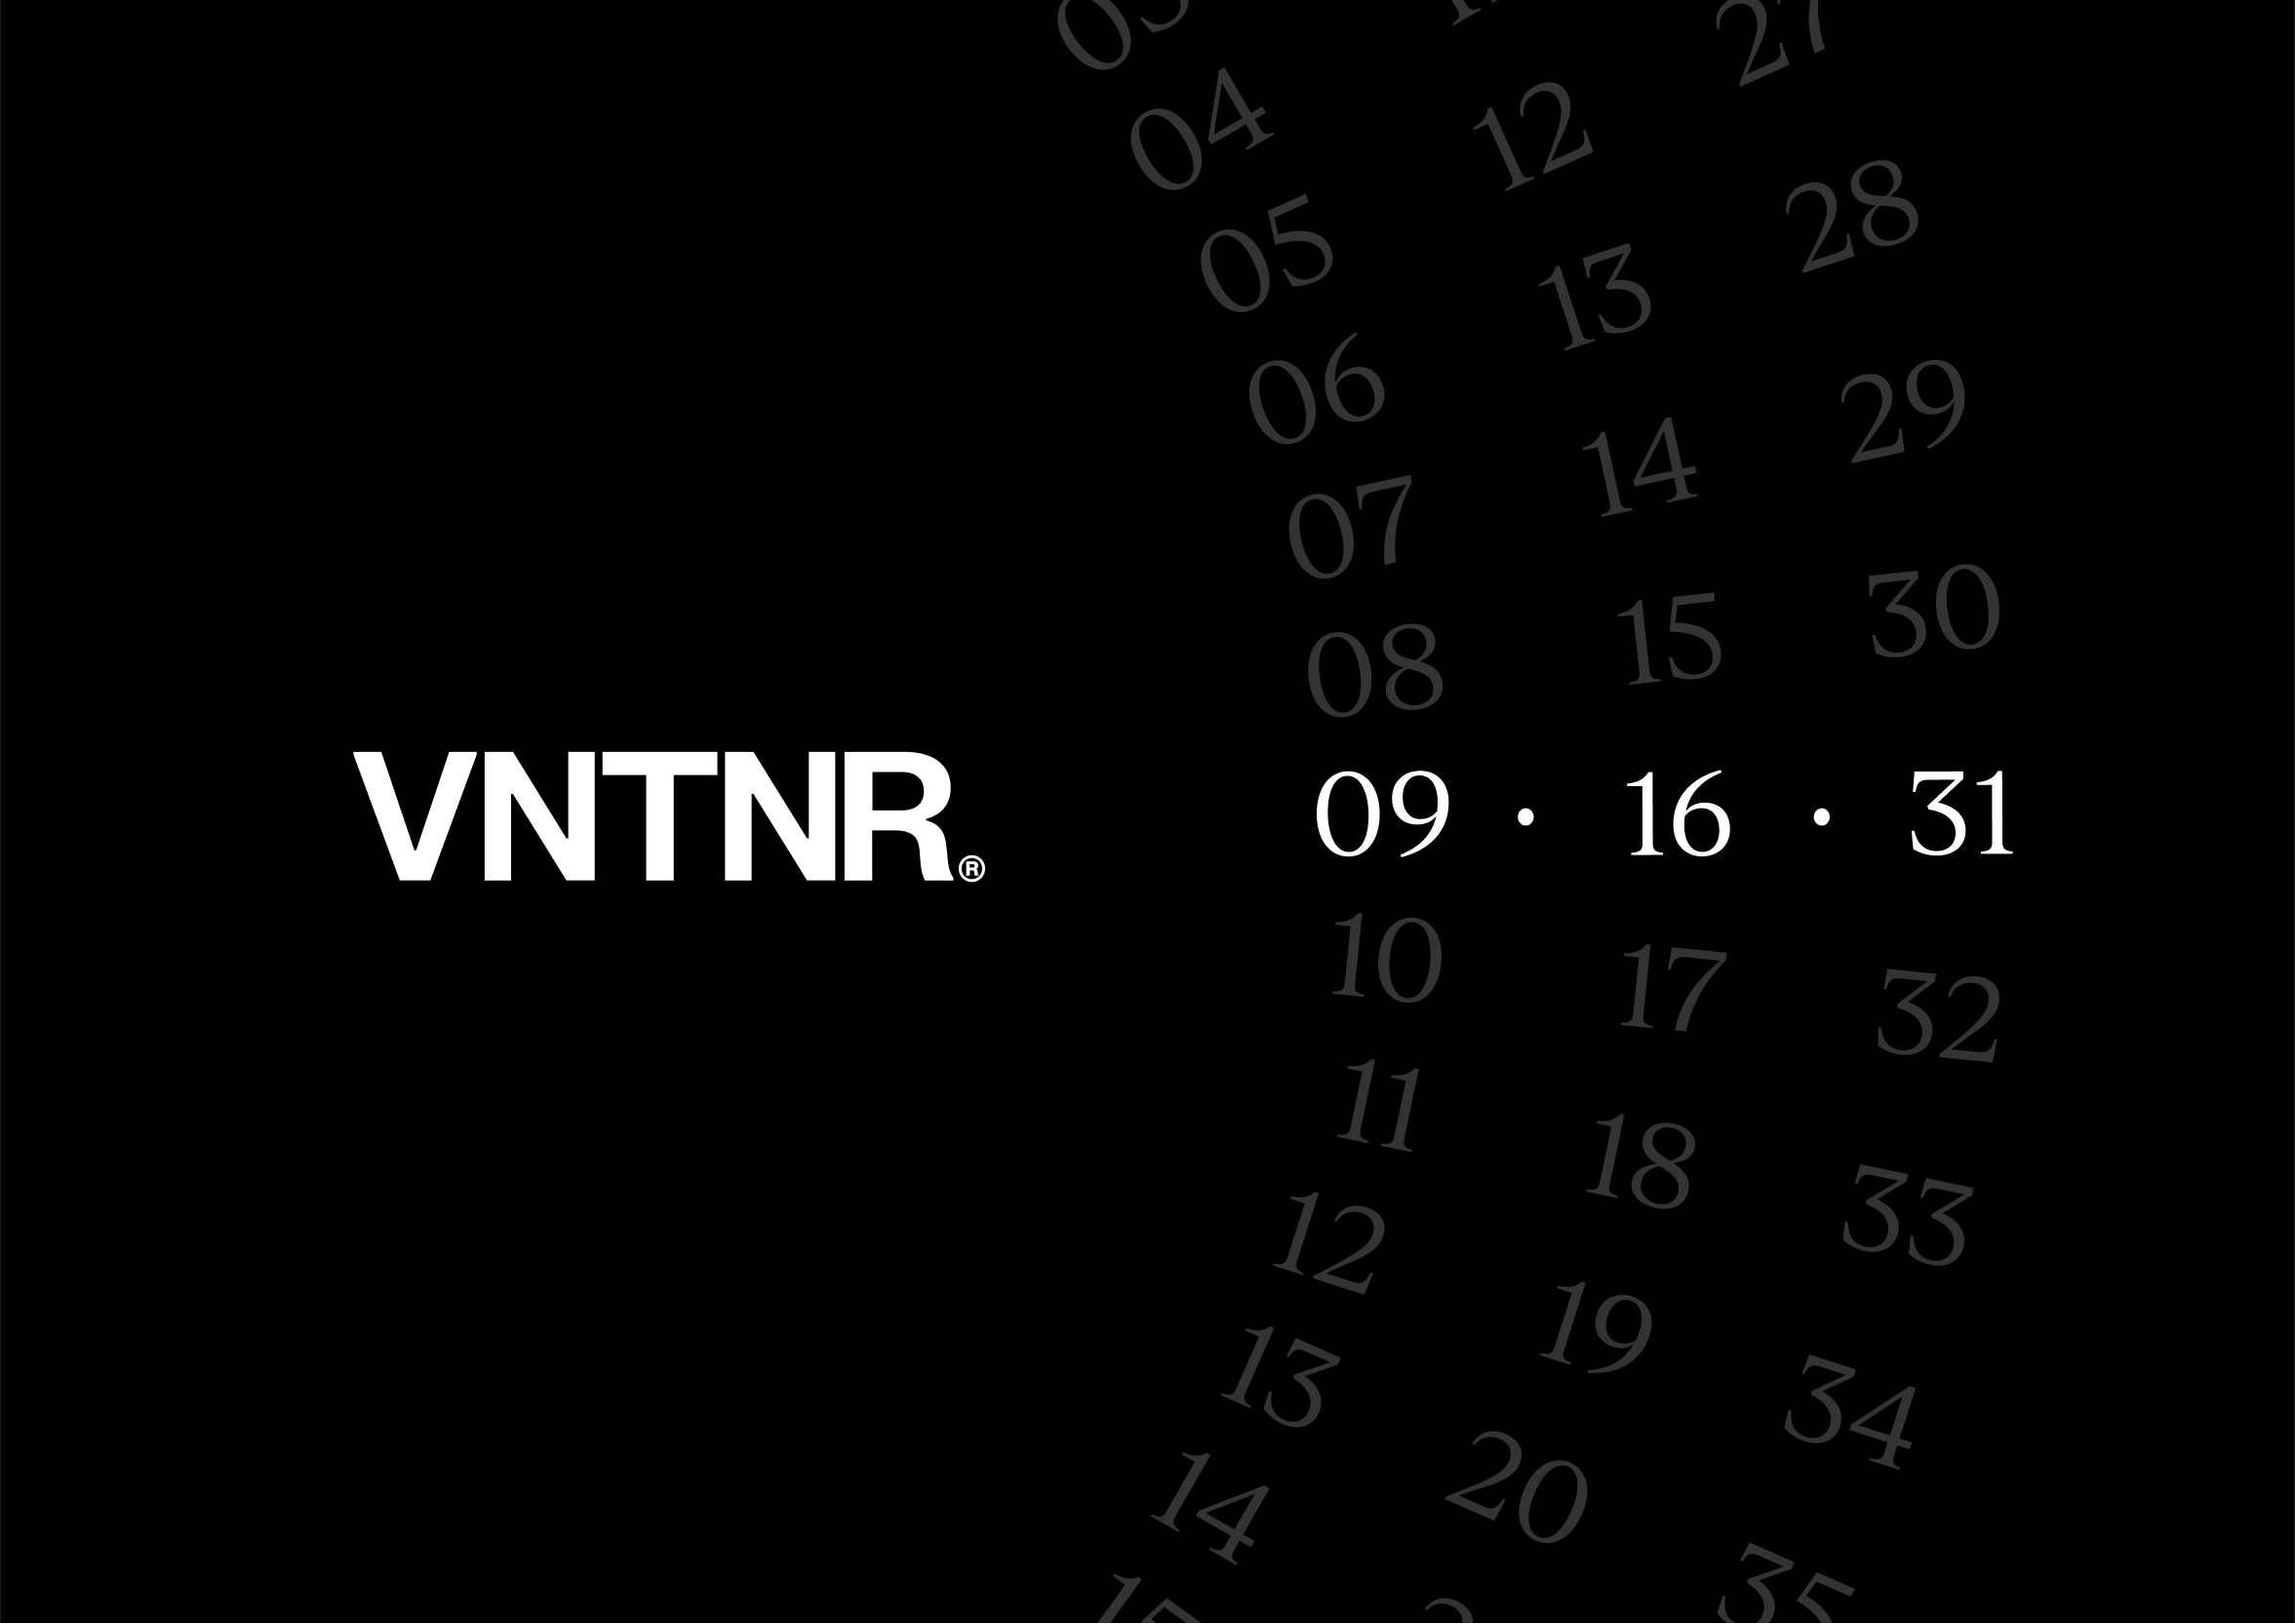 The VNTNR logo with a time code next to it